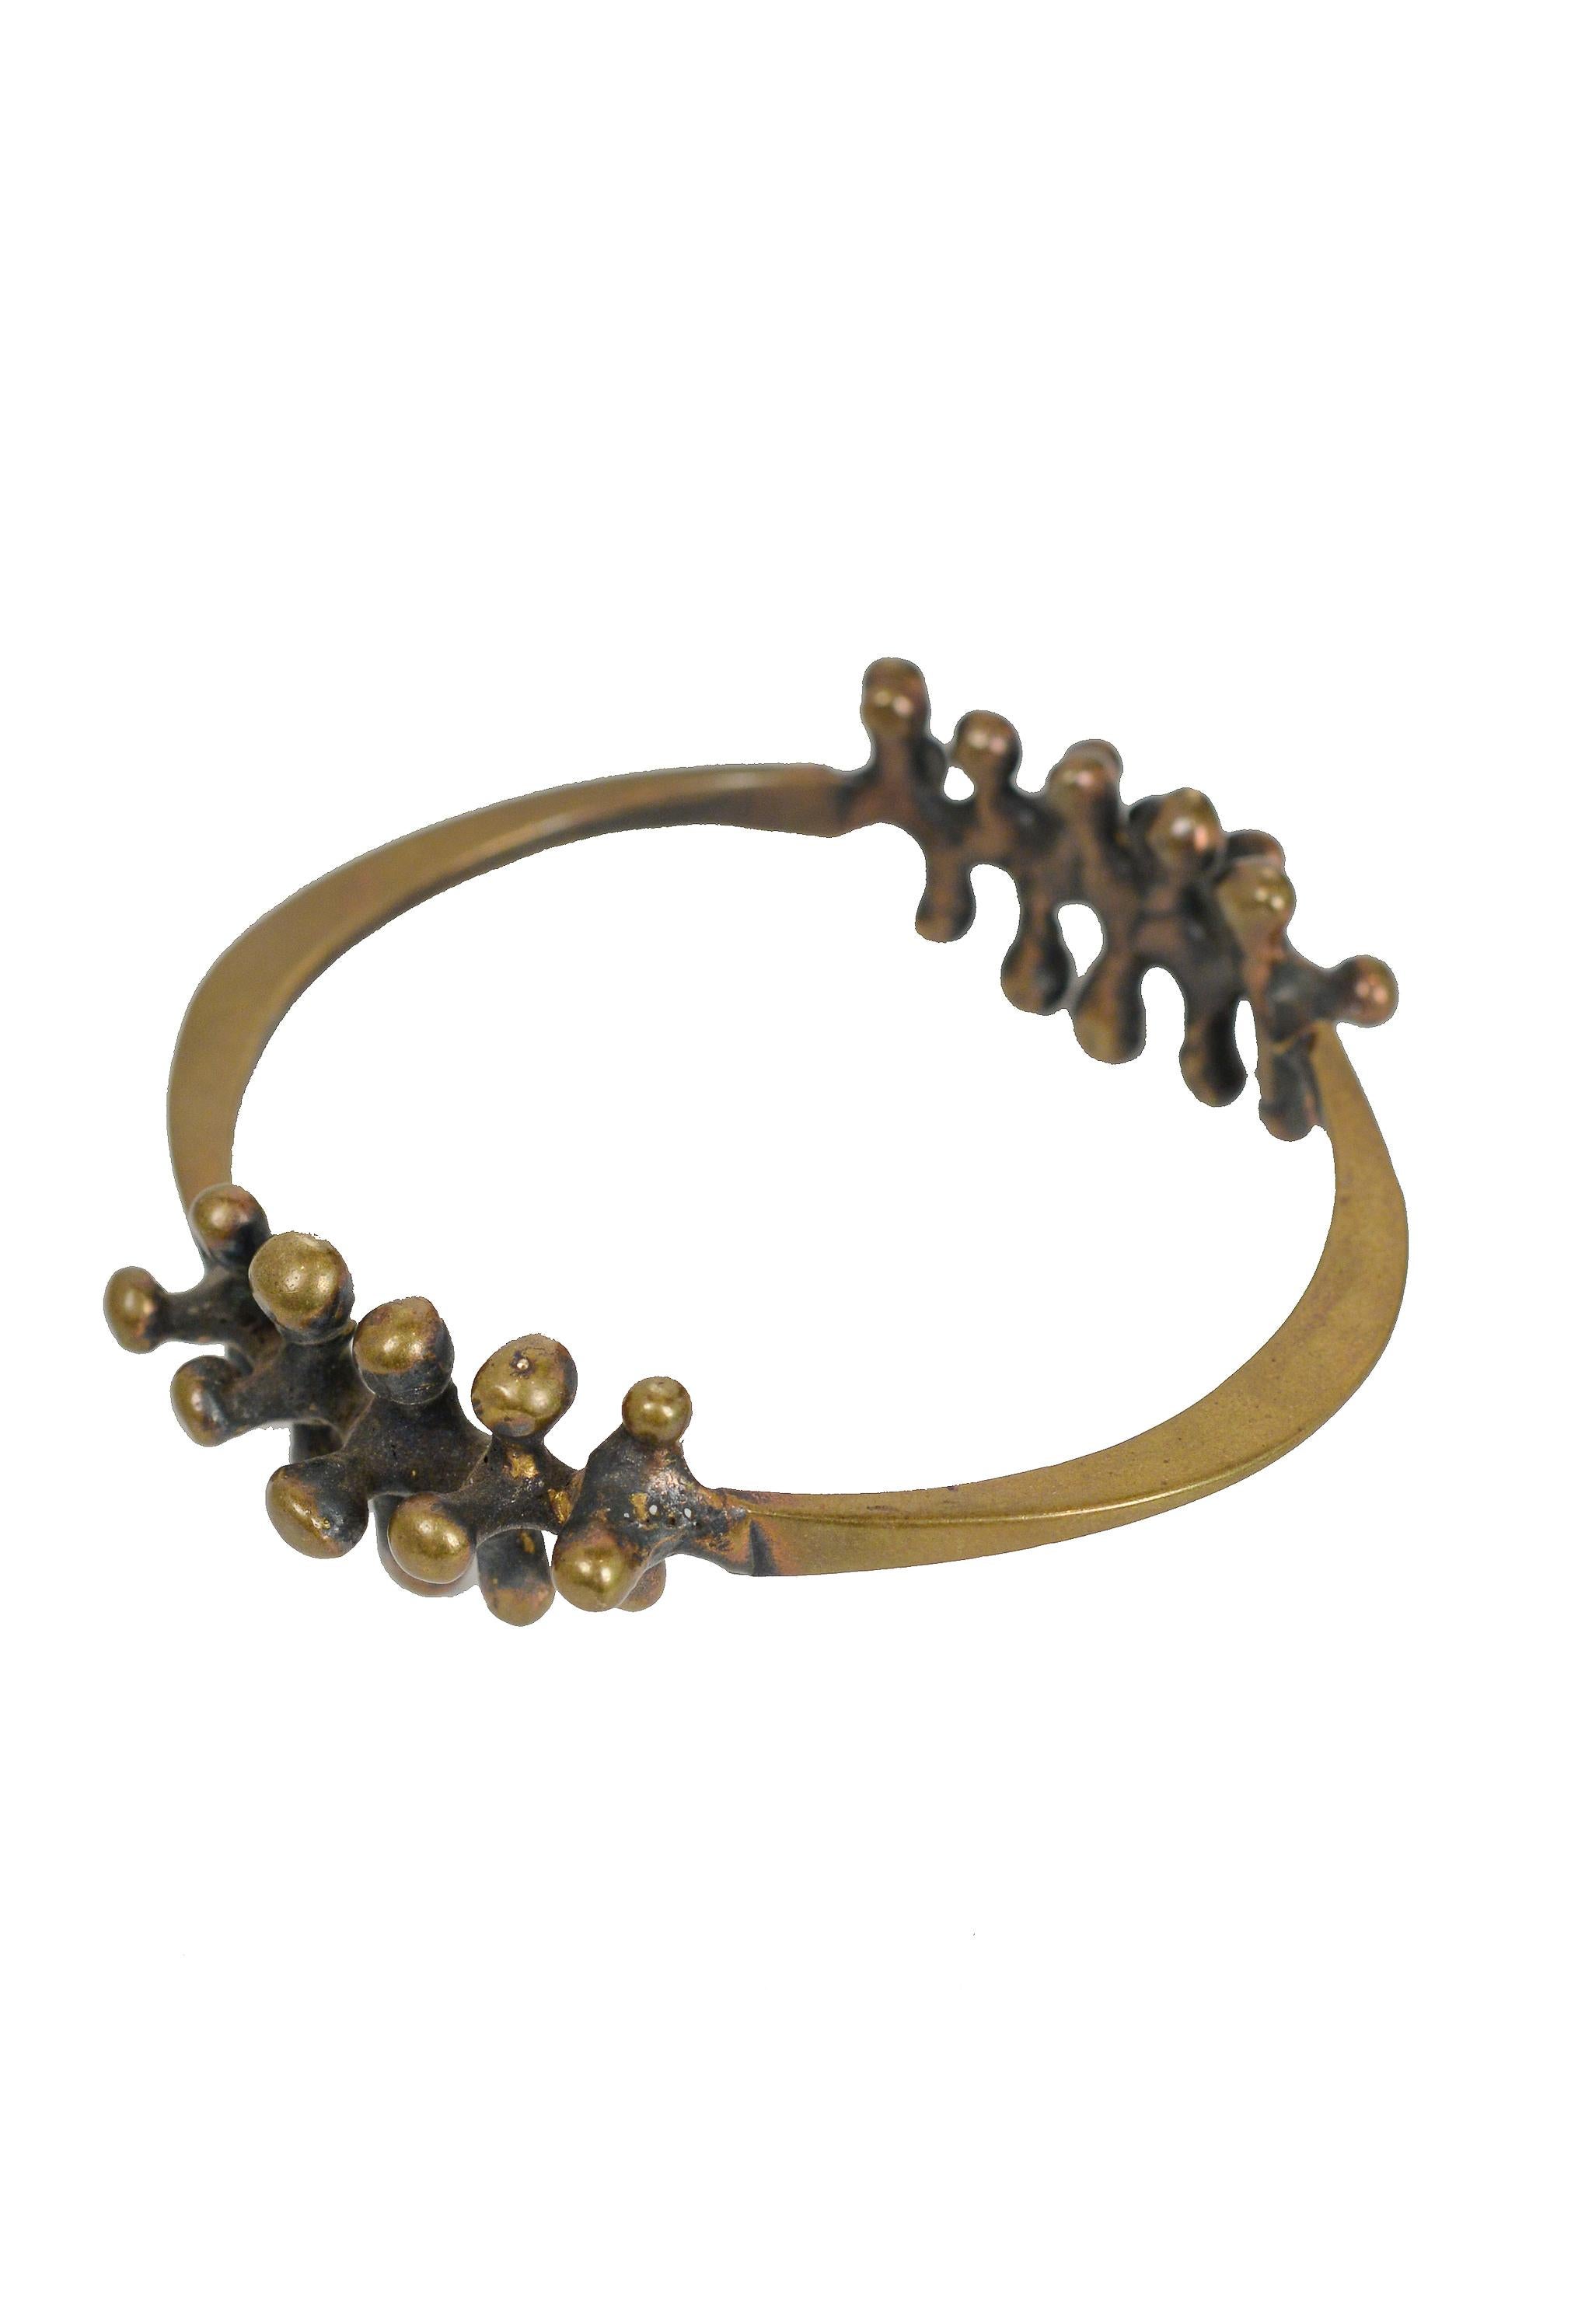 Jack Boyd Brutalist Bronze Double Spore Bracelet In Excellent Condition For Sale In Los Angeles, CA